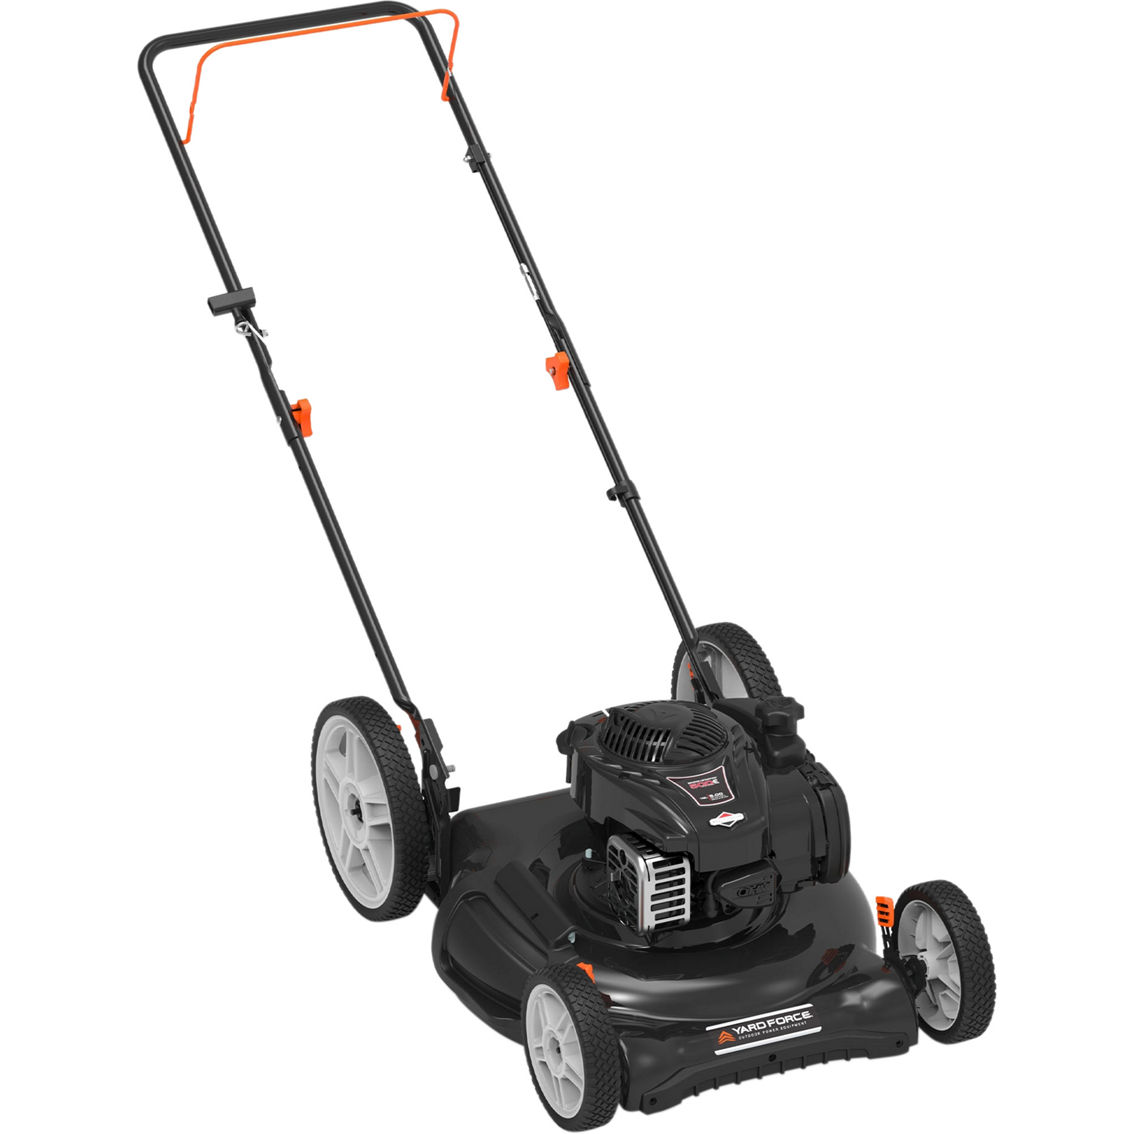 Yard Force 22 in. 2 in 1 Gas Push Mower - Image 2 of 5